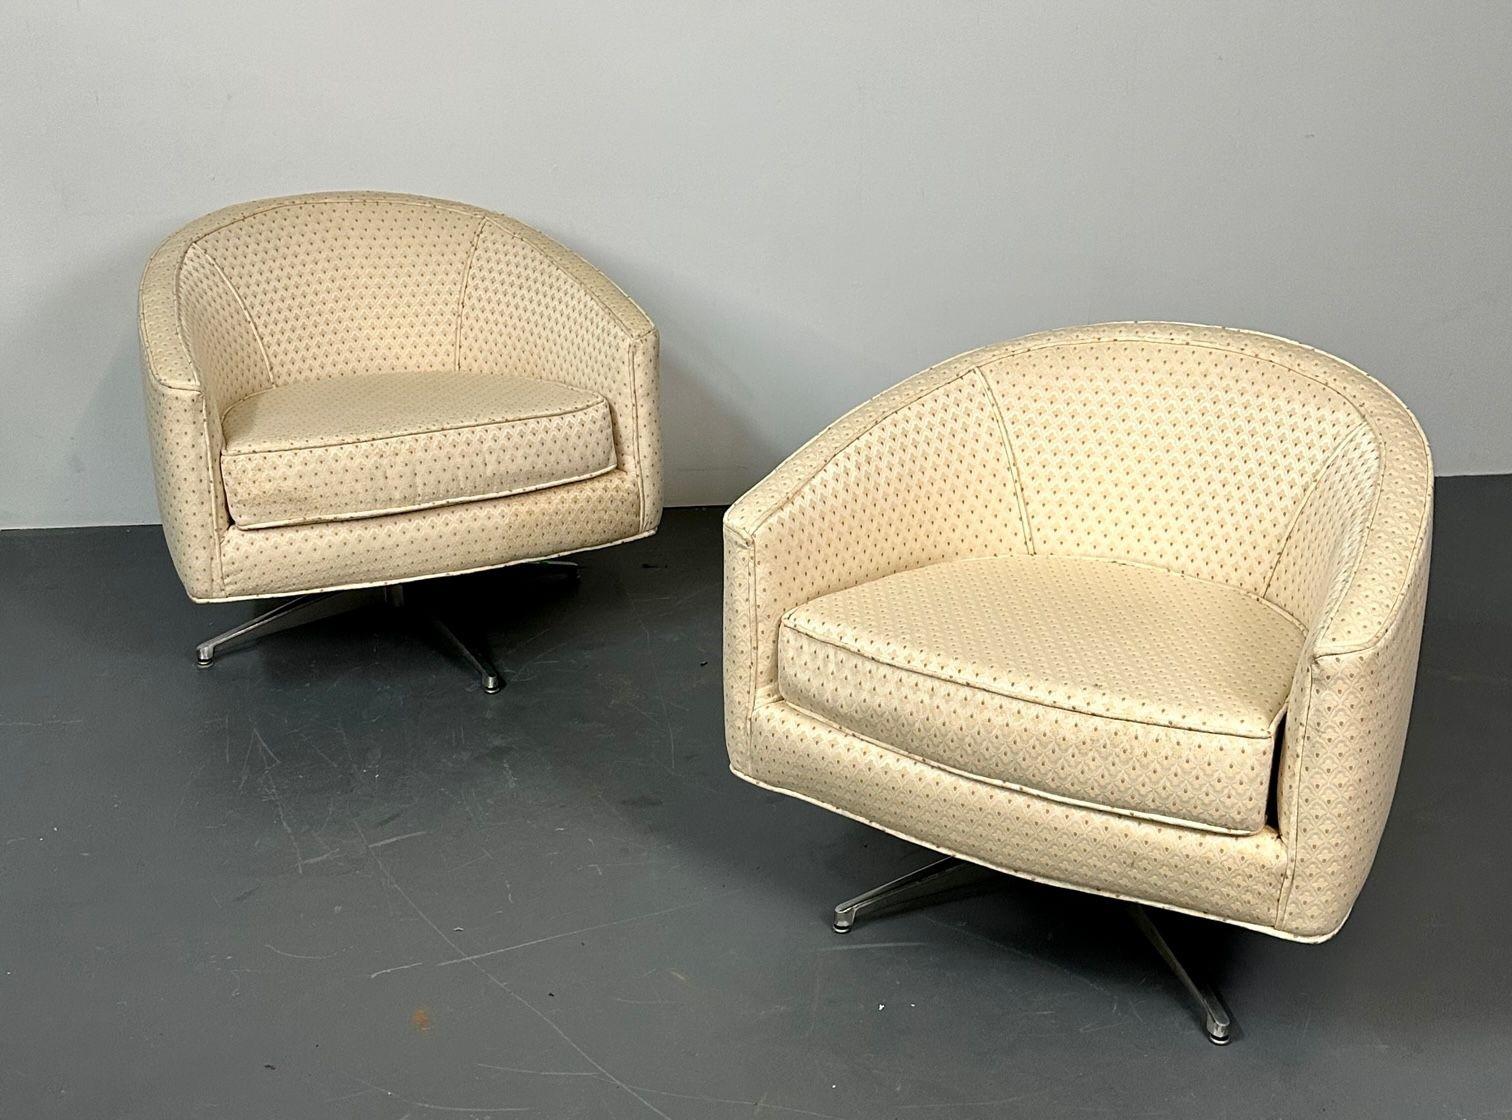 Mid-Century Modern American Designer Swivel / Lounge Chairs
Pair of modern swivel chairs perfect for an office, retail, or residential setting. Original fabric/cushioning. 
Other American designers of the period include Milo Baughman, Paul McCobb,